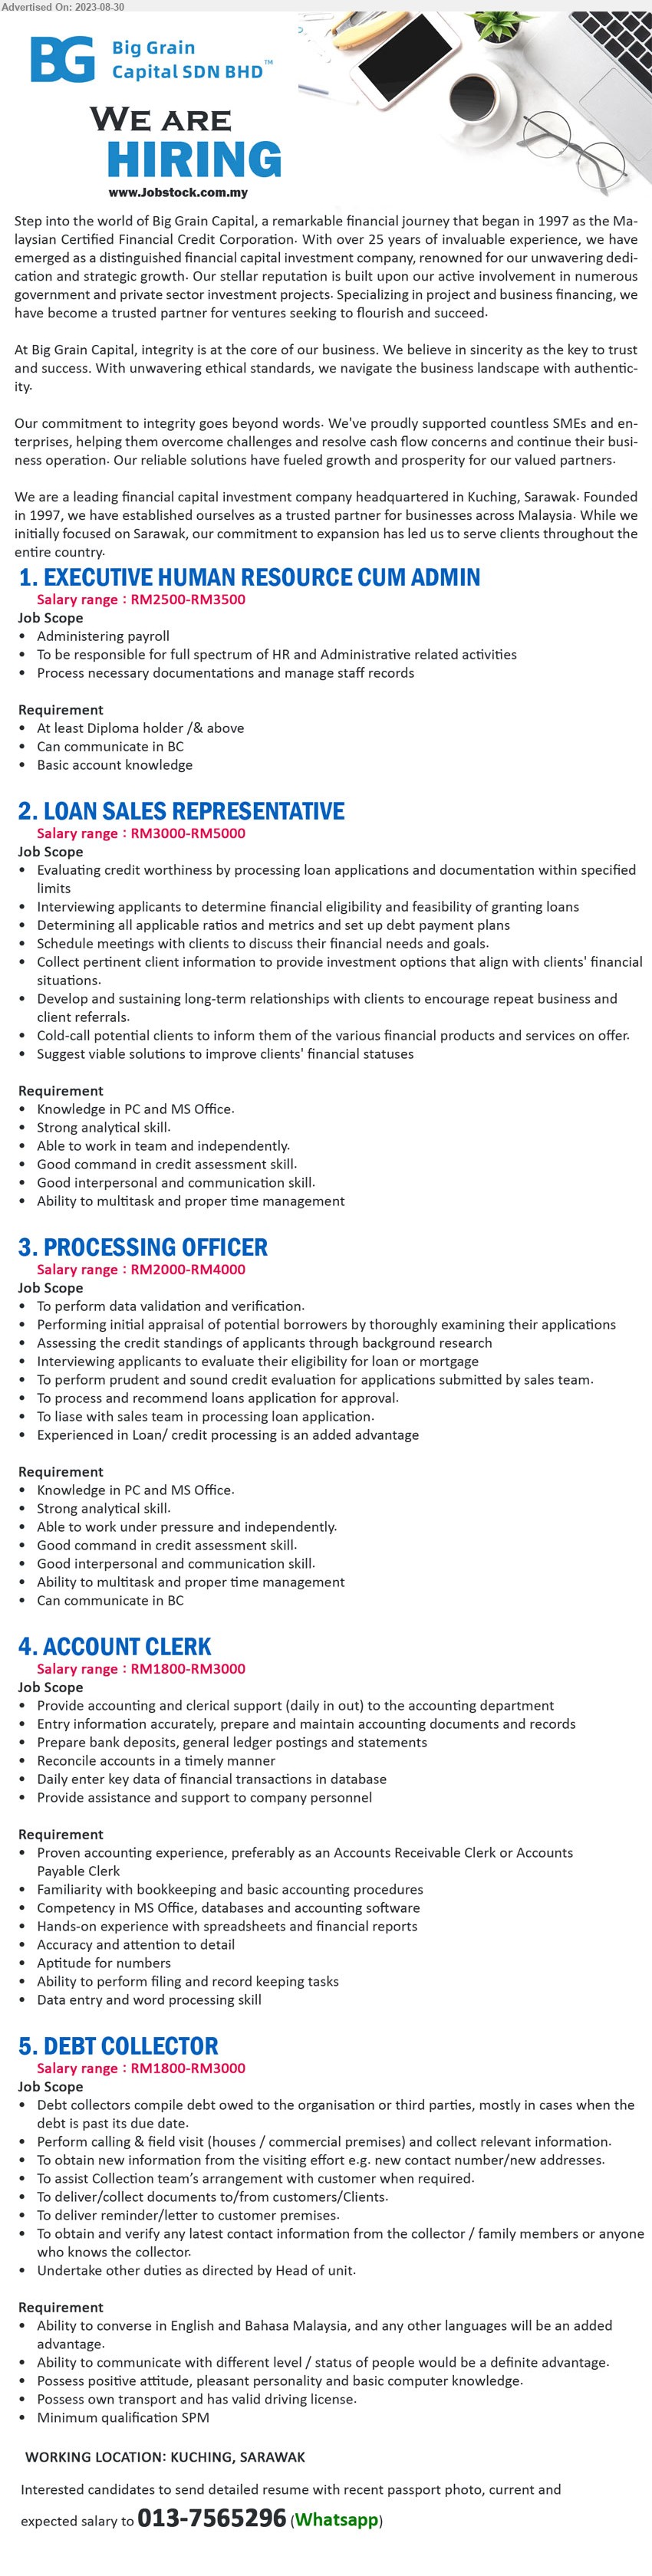 BIG GRAIN CAPITAL SDN BHD - 1. EXECUTIVE HUMAN RESOURCE CUM ADMIN (Kuching), RM2500-RM3500, Diploma holder /& above, Basic account knowledge ,...
2. LOAN SALES REPRESENTATIVE (Kuching), RM3000-RM5000, Knowledge in PC and MS Office...
3. PROCESSING OFFICER (Kuching), RM2000-RM4000, Knowledge in PC and MS Office, Strong analytical skill...
4. ACCOUNT CLERK (Kuching), RM1800-RM3000, Familiarity with bookkeeping and basic accounting procedures...
5. DEBT COLLECTOR (Kuching), RM1800-RM3000, SPM, Ability to converse in English and Bahasa Malaysia, and any other languages will be an added advantage...
Please contact:  013-7565296 (Whatsapp)